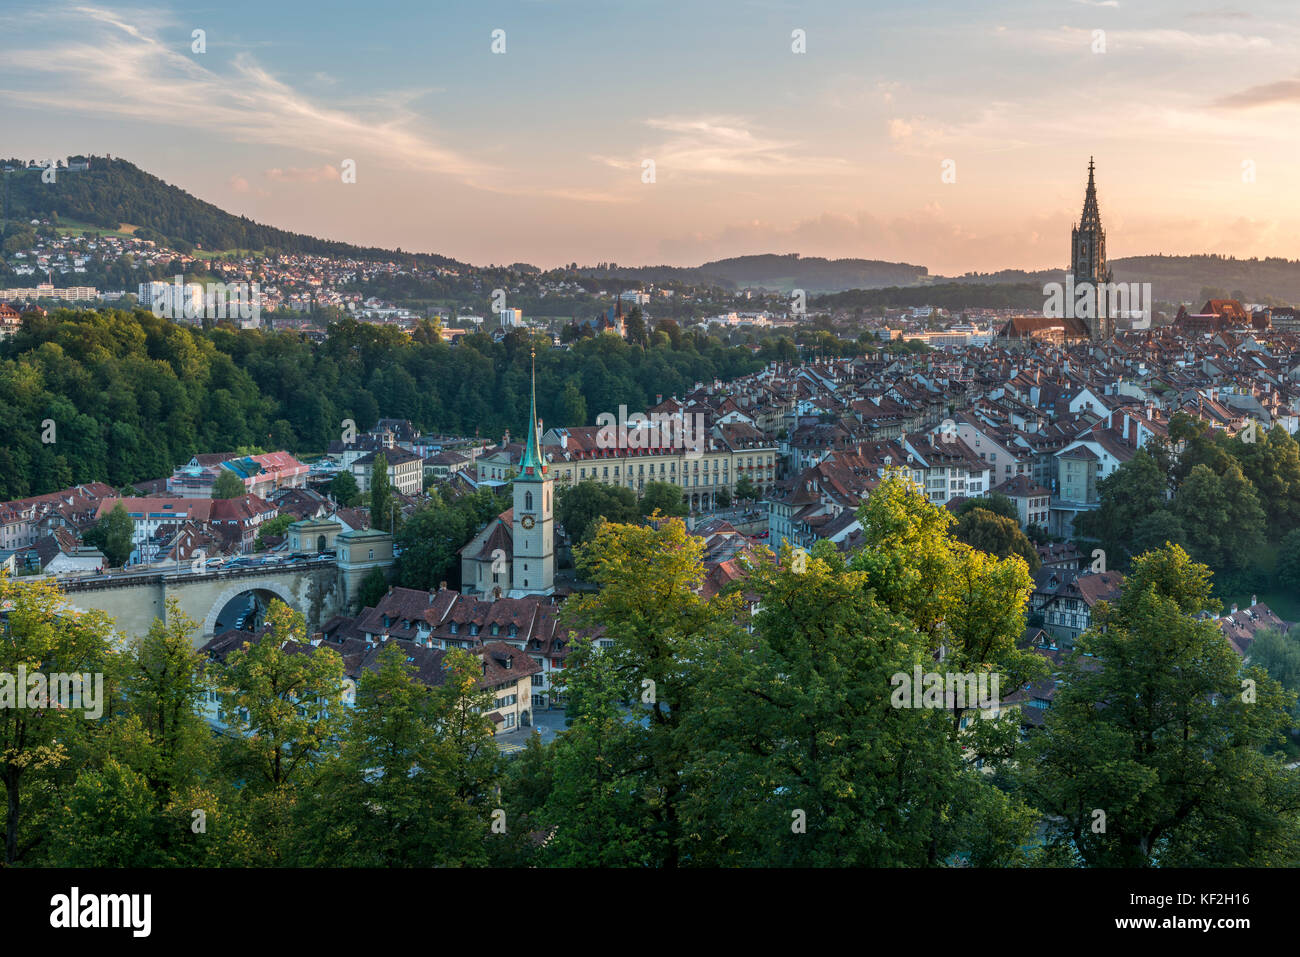 Switzerland, Bern, cityscape with Nydeggkirche and minster in the evening Stock Photo